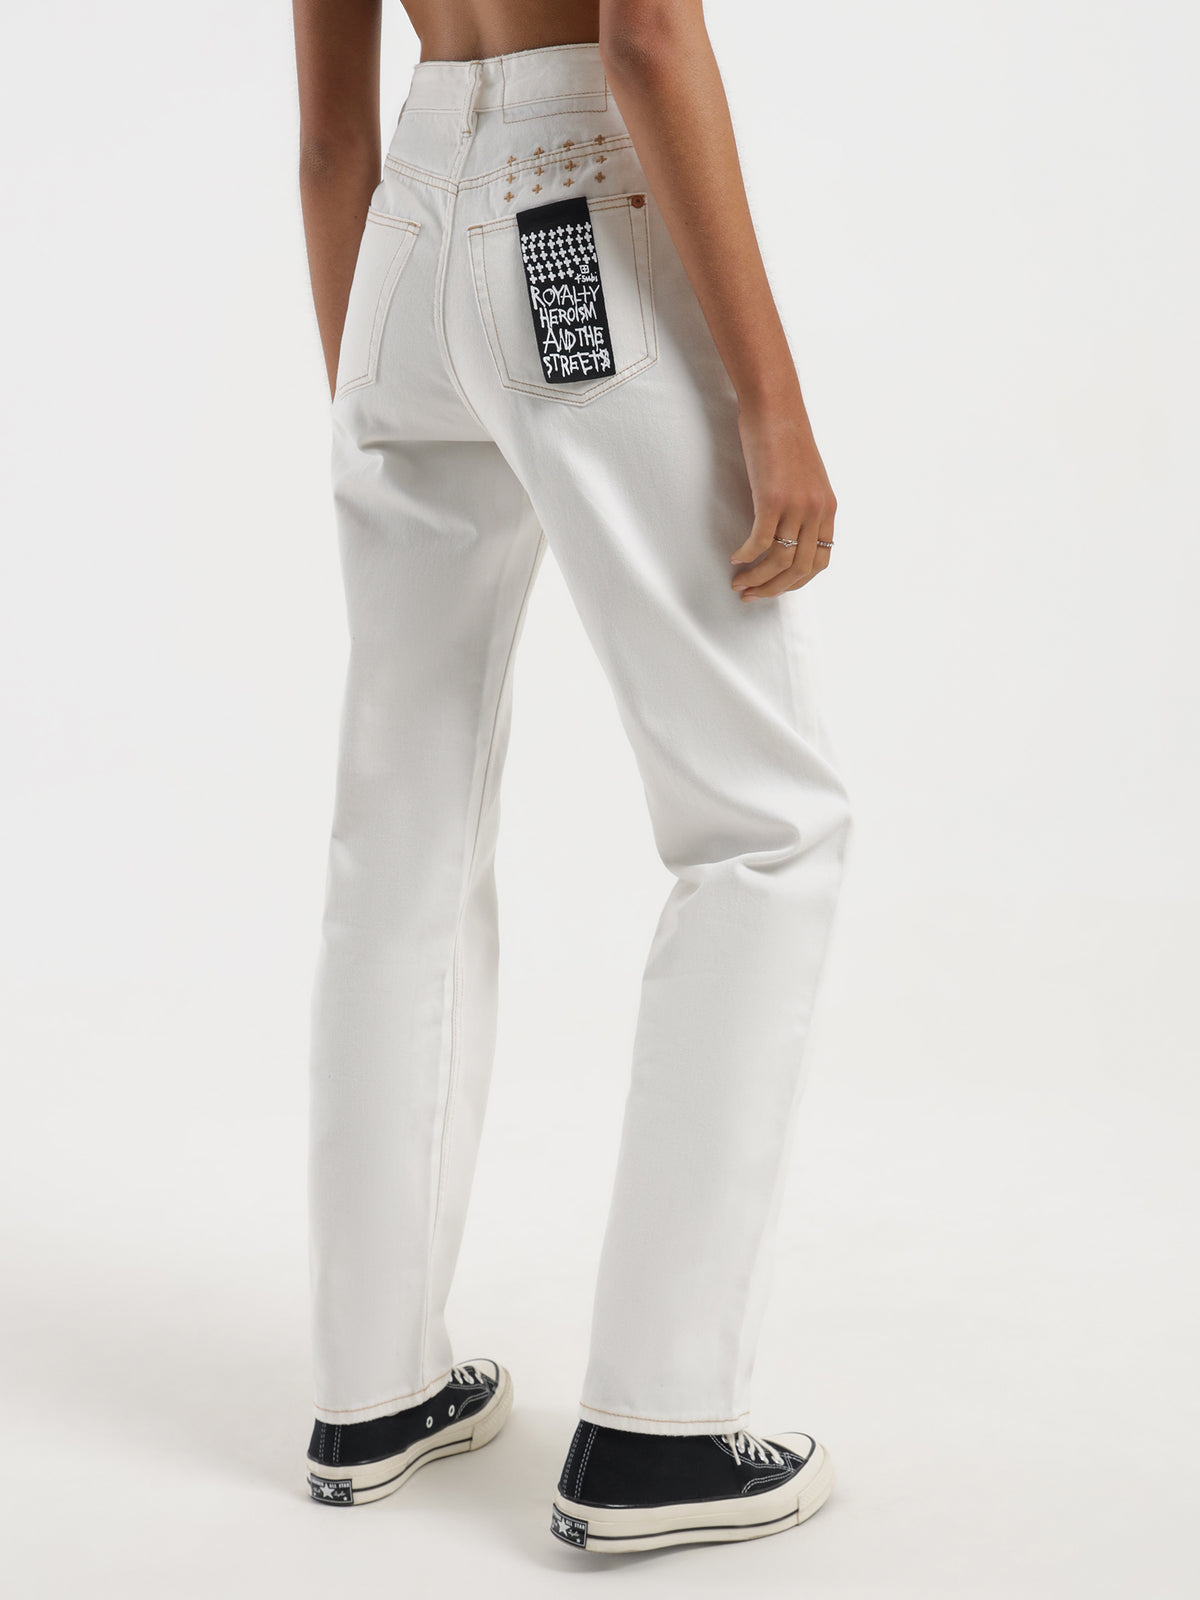 Playback Jeans in Sugar Rush White